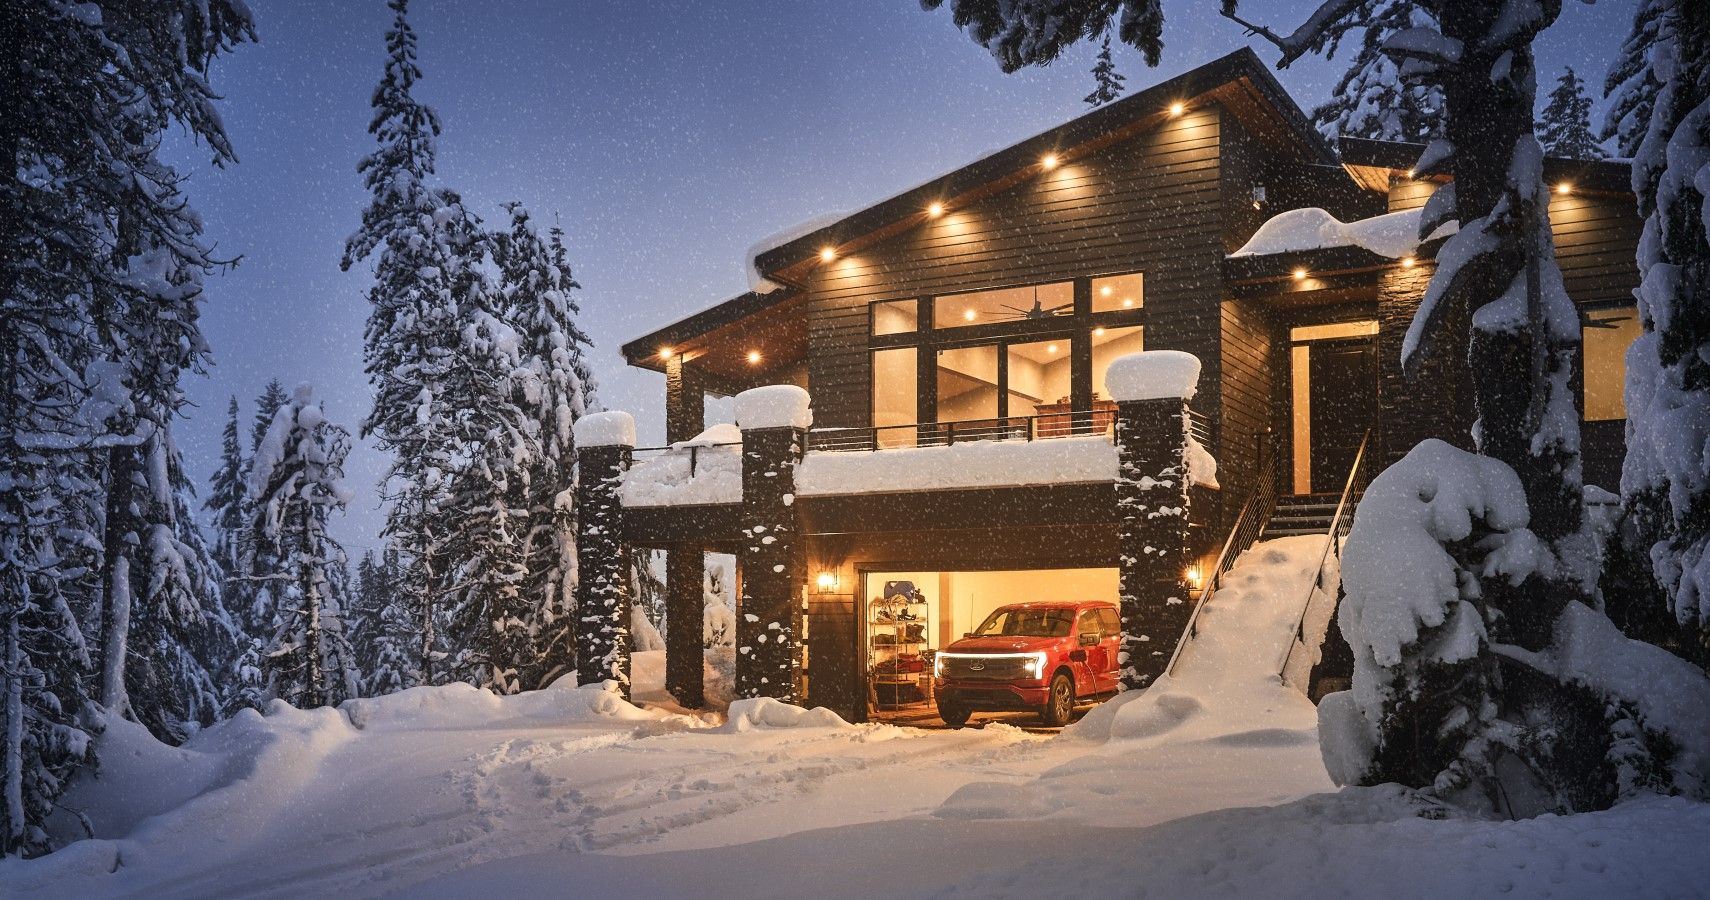 Ford's Home Integration System providing power during a snowstorm